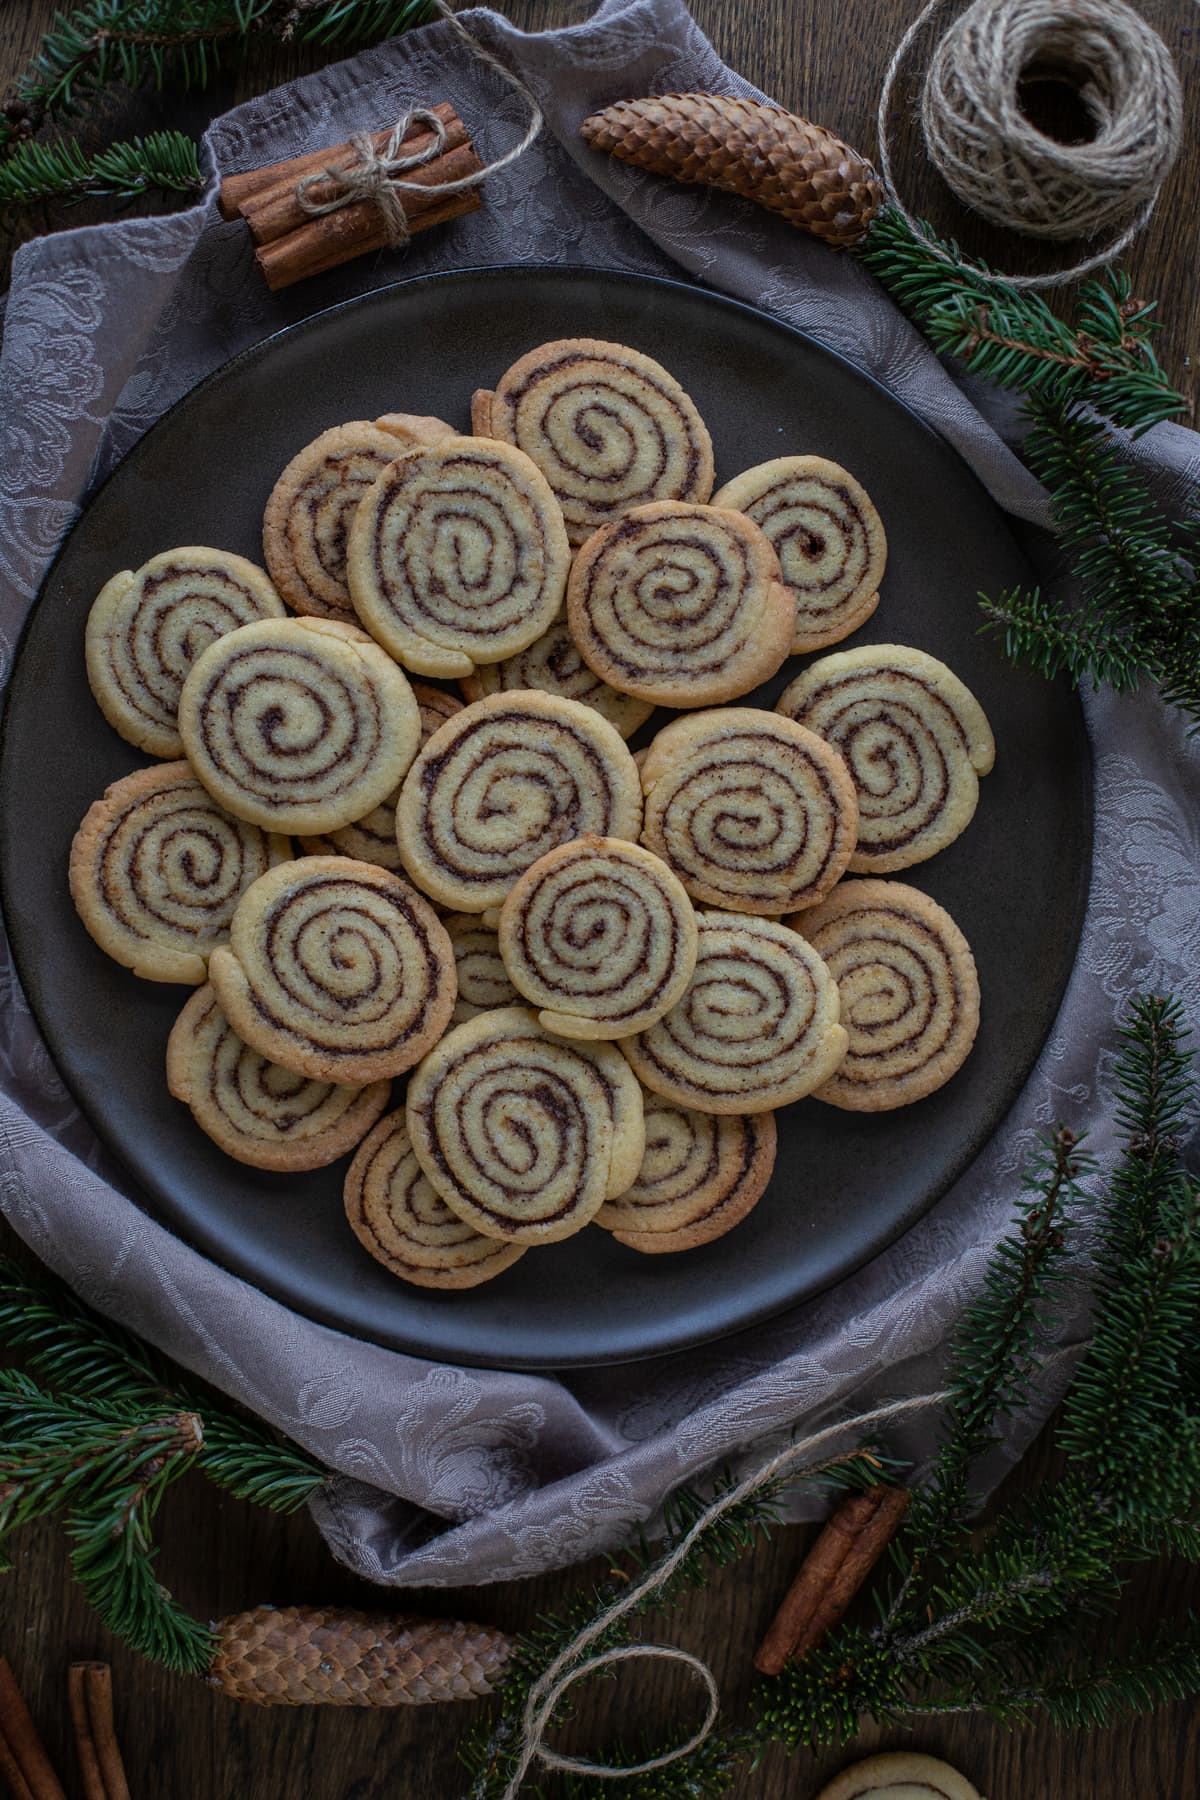 Cinnamon roll cookies on a brown plate with pine decorations.